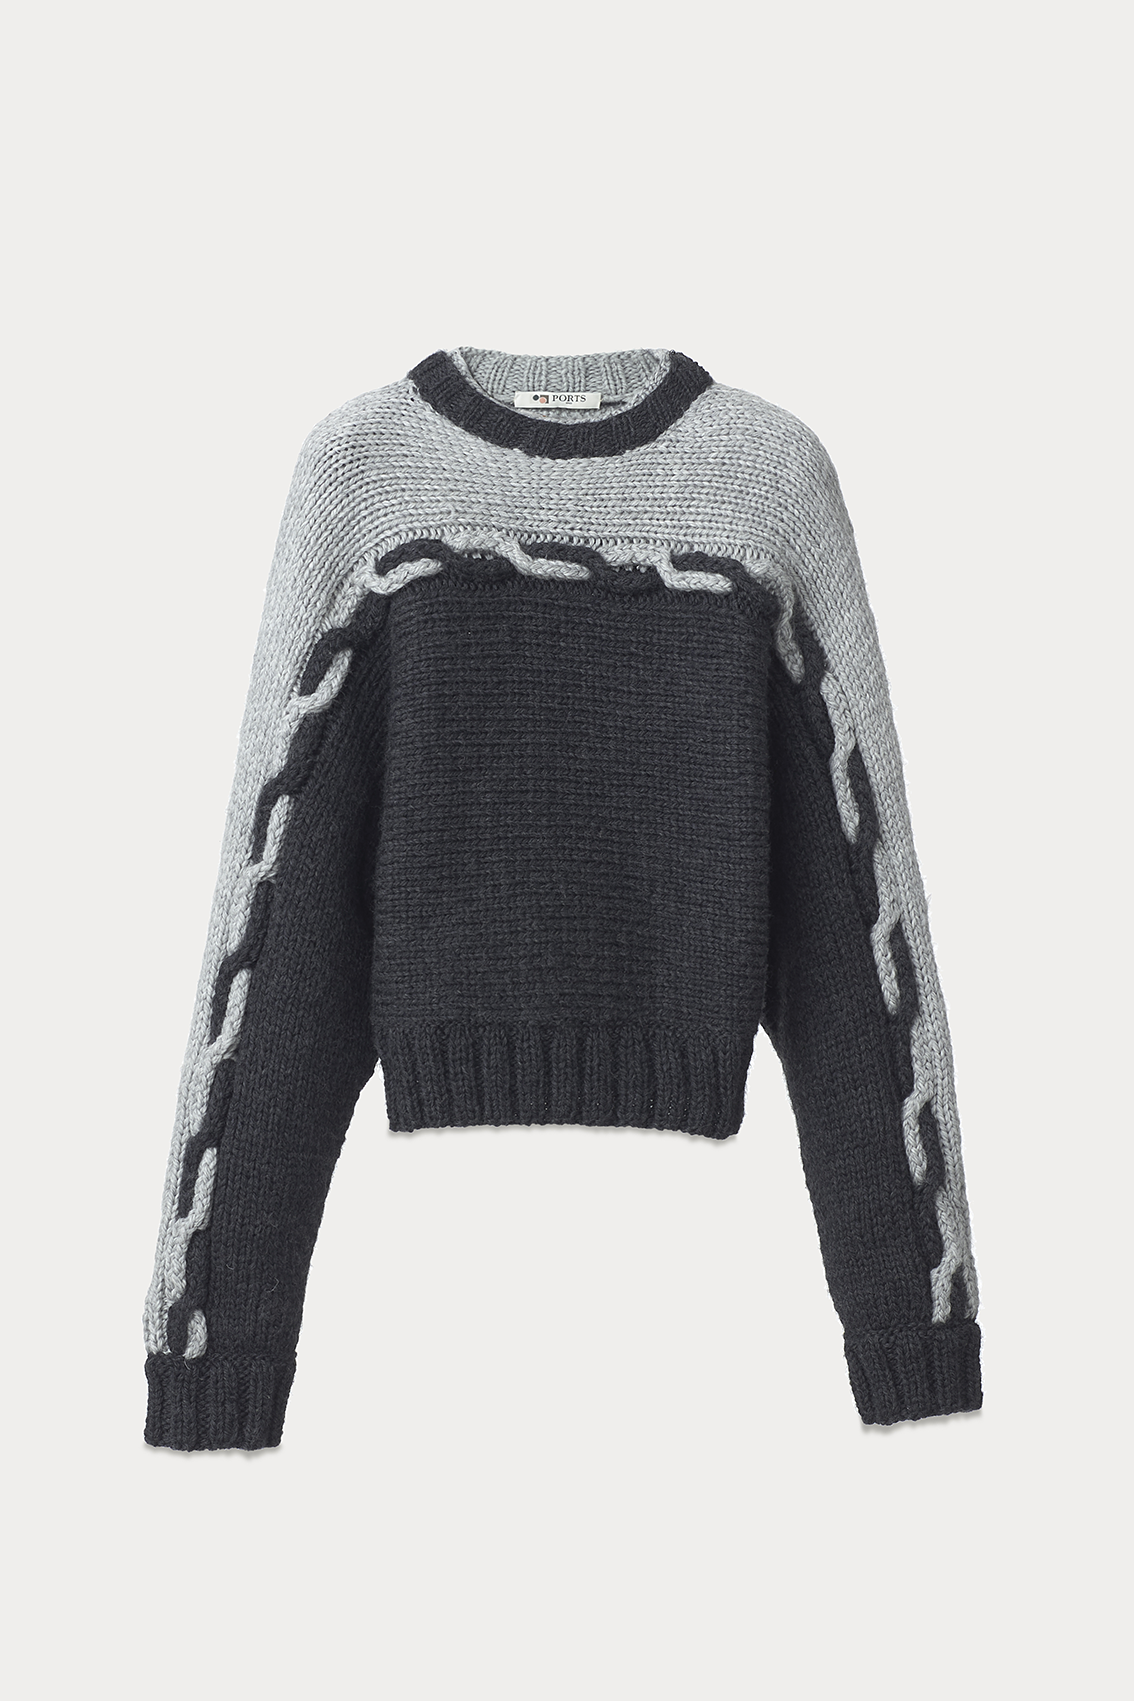 Grey And Black Braid Double Collar Knitted Pullover